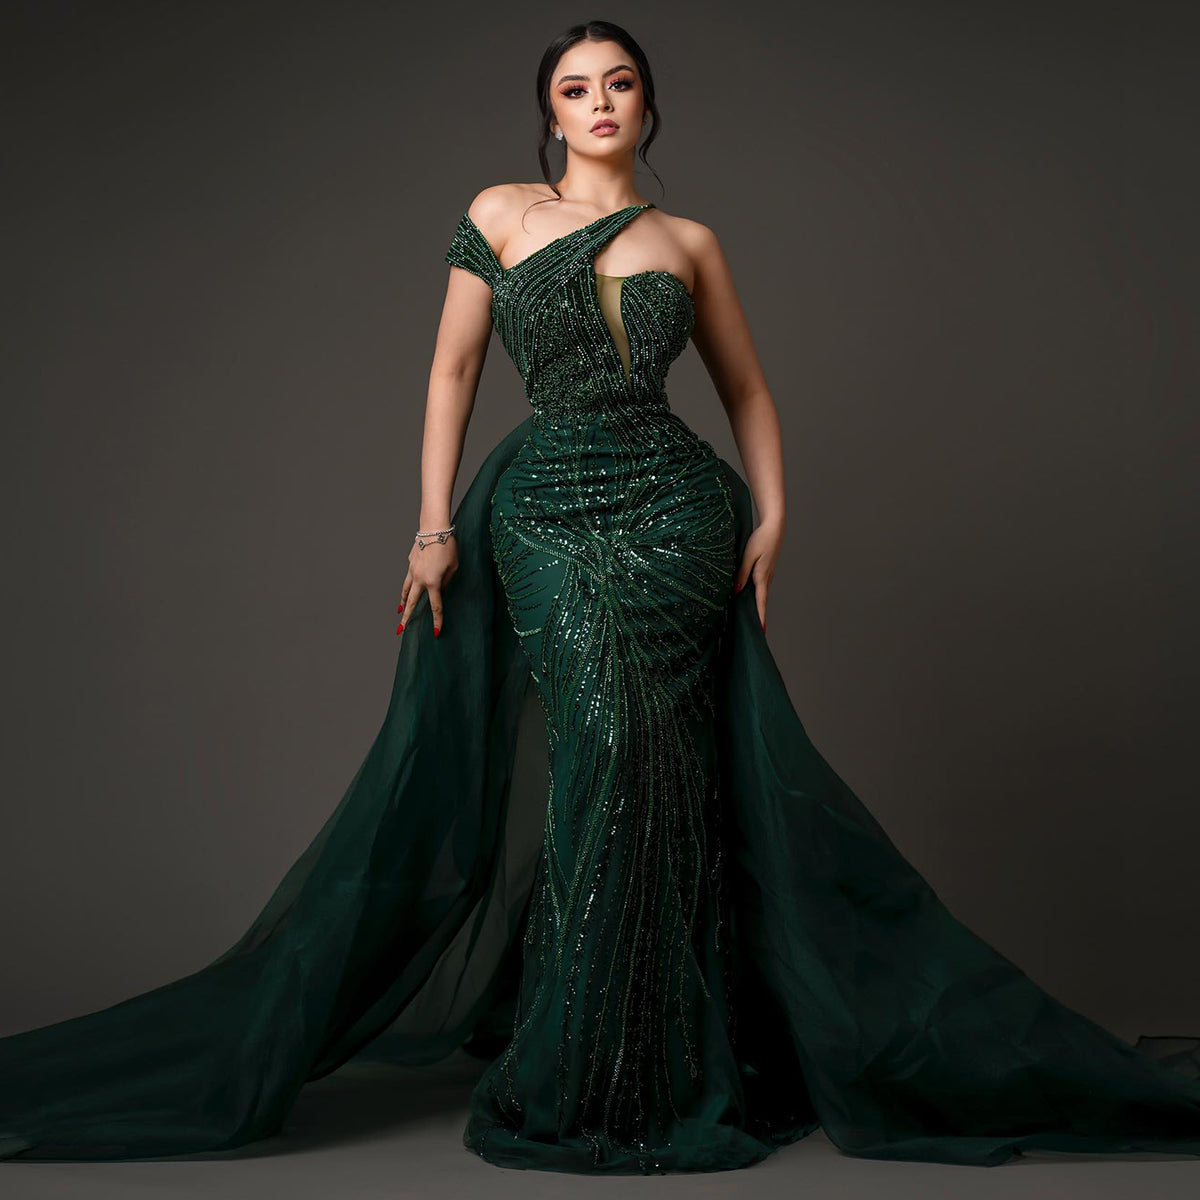 Sharon Said Luxury Emerald Green Evening Dress with Overskirt Elegant One Shoulder Women Wedding Party Prom Formal Gowns SS128